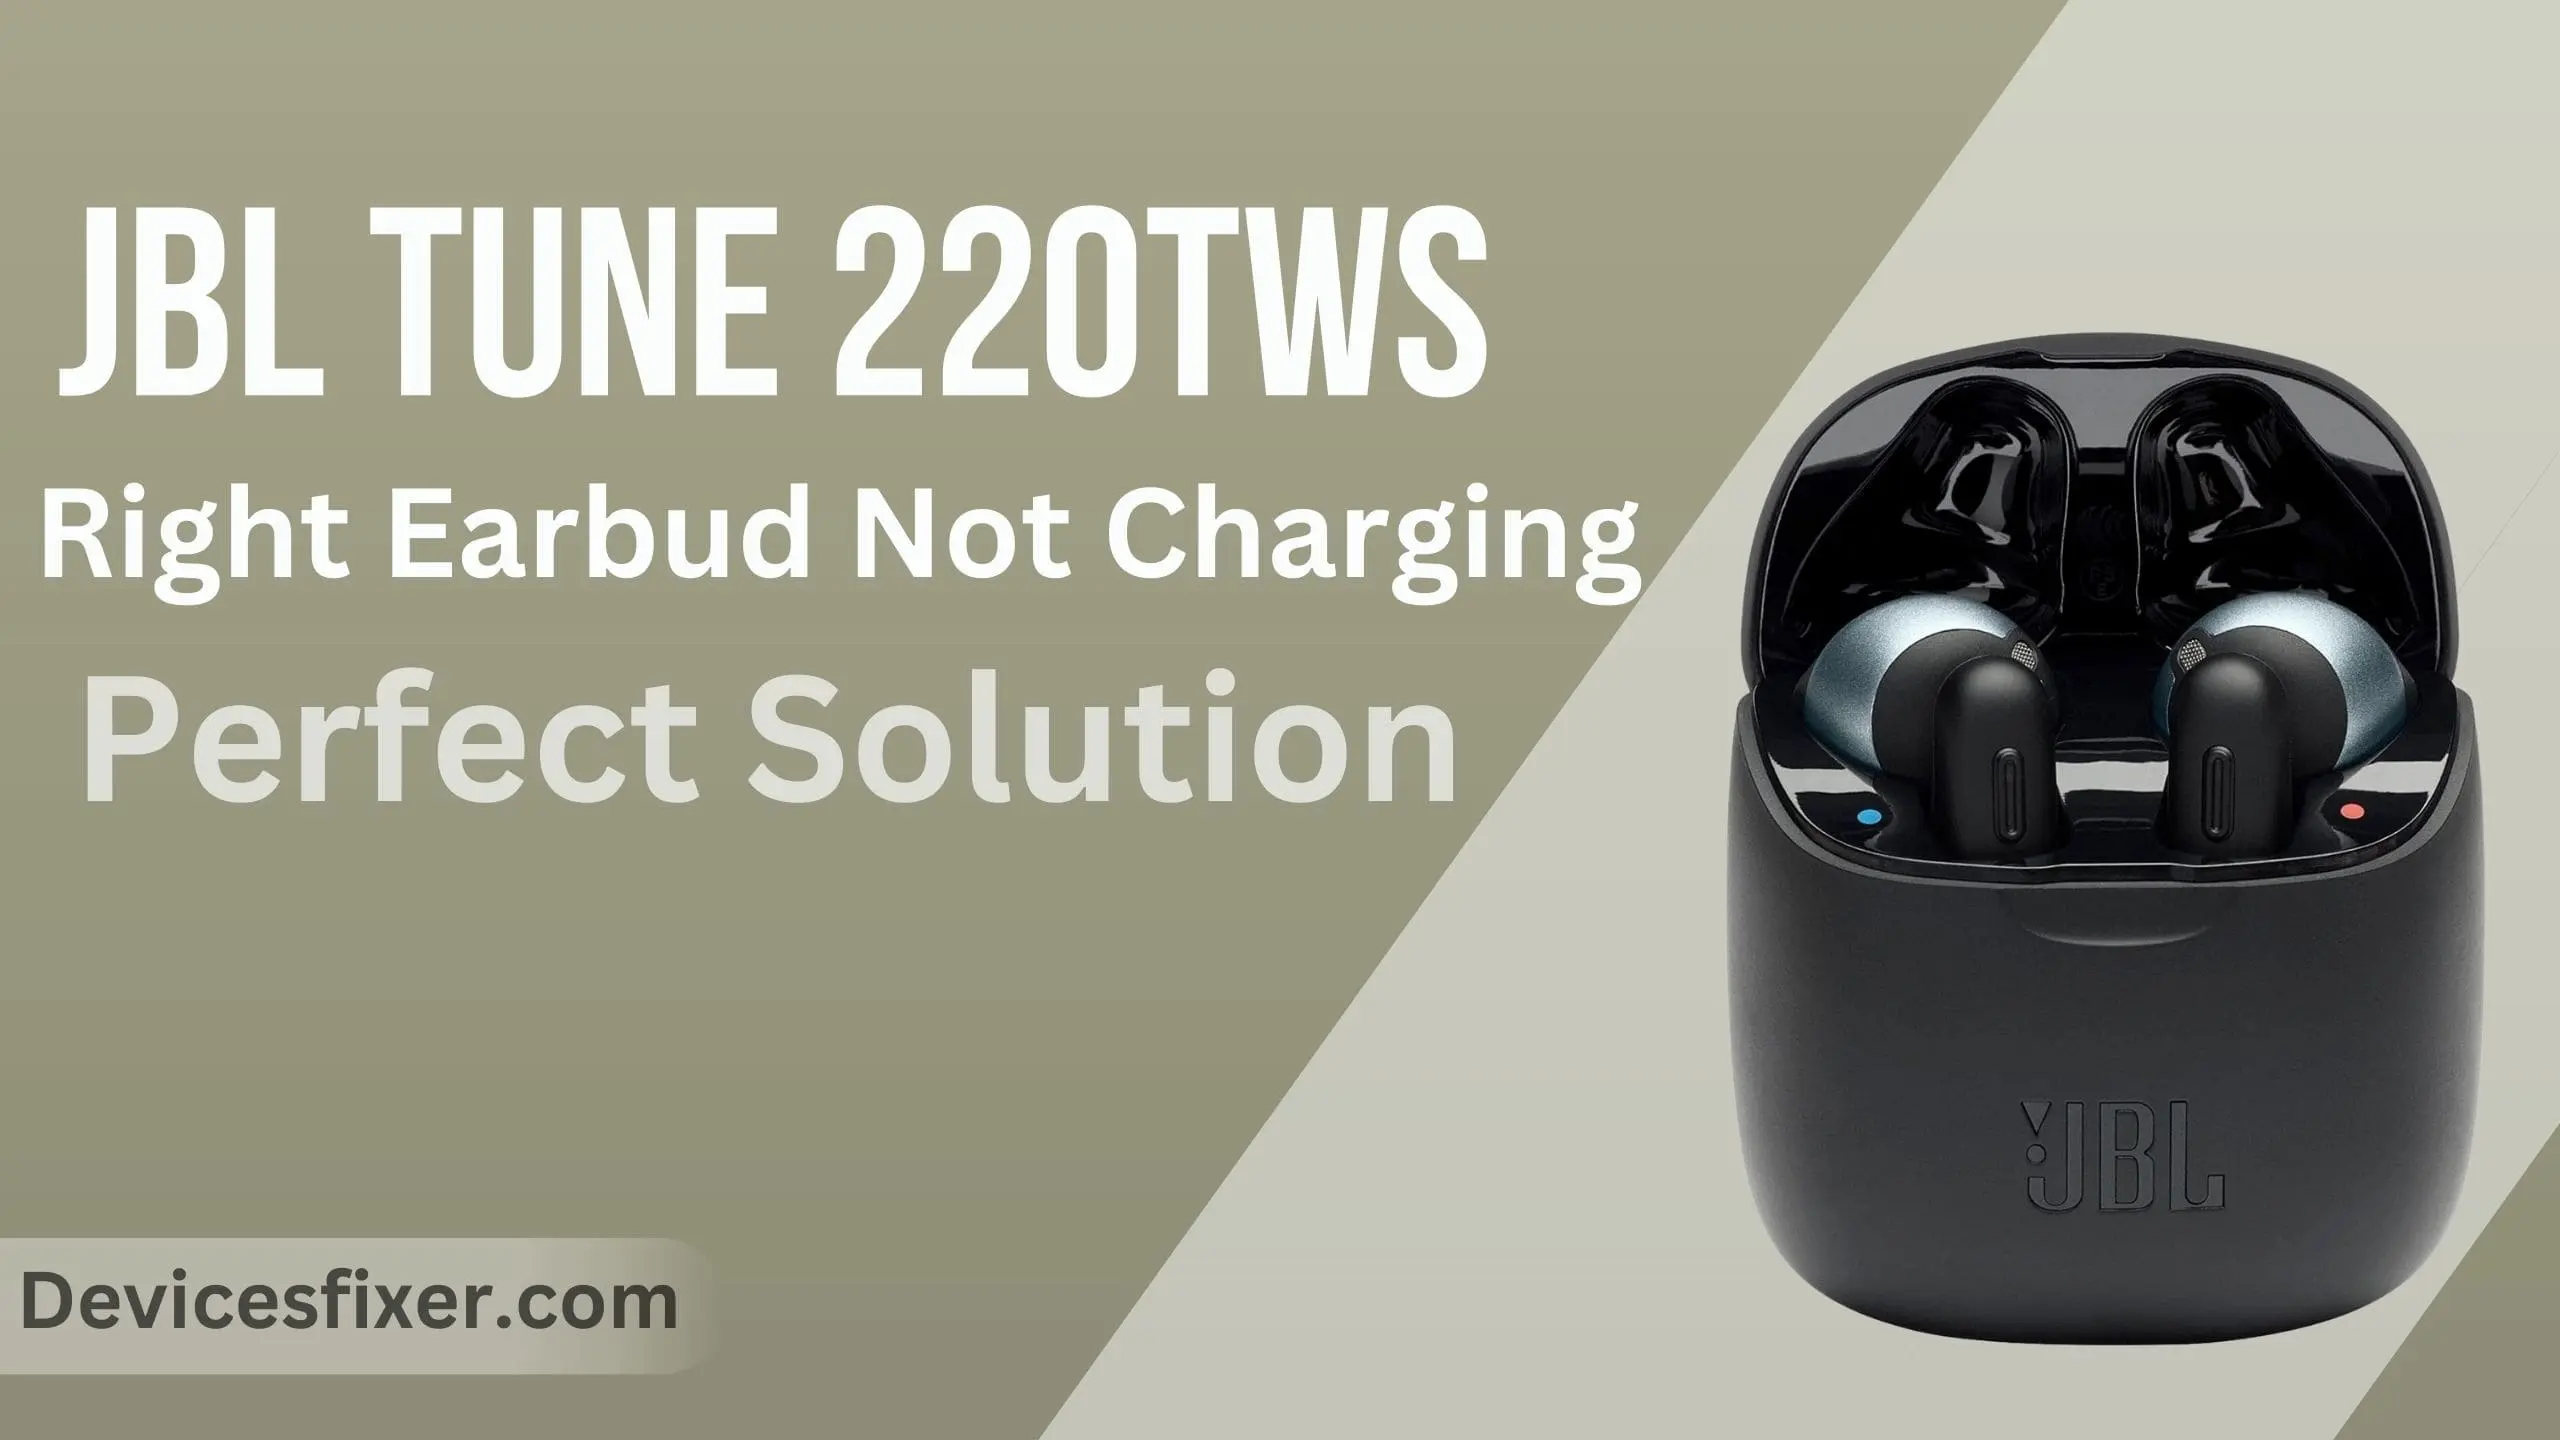 JBL Tune 220TWS Right Earbud Not Charging - Perfect Solution